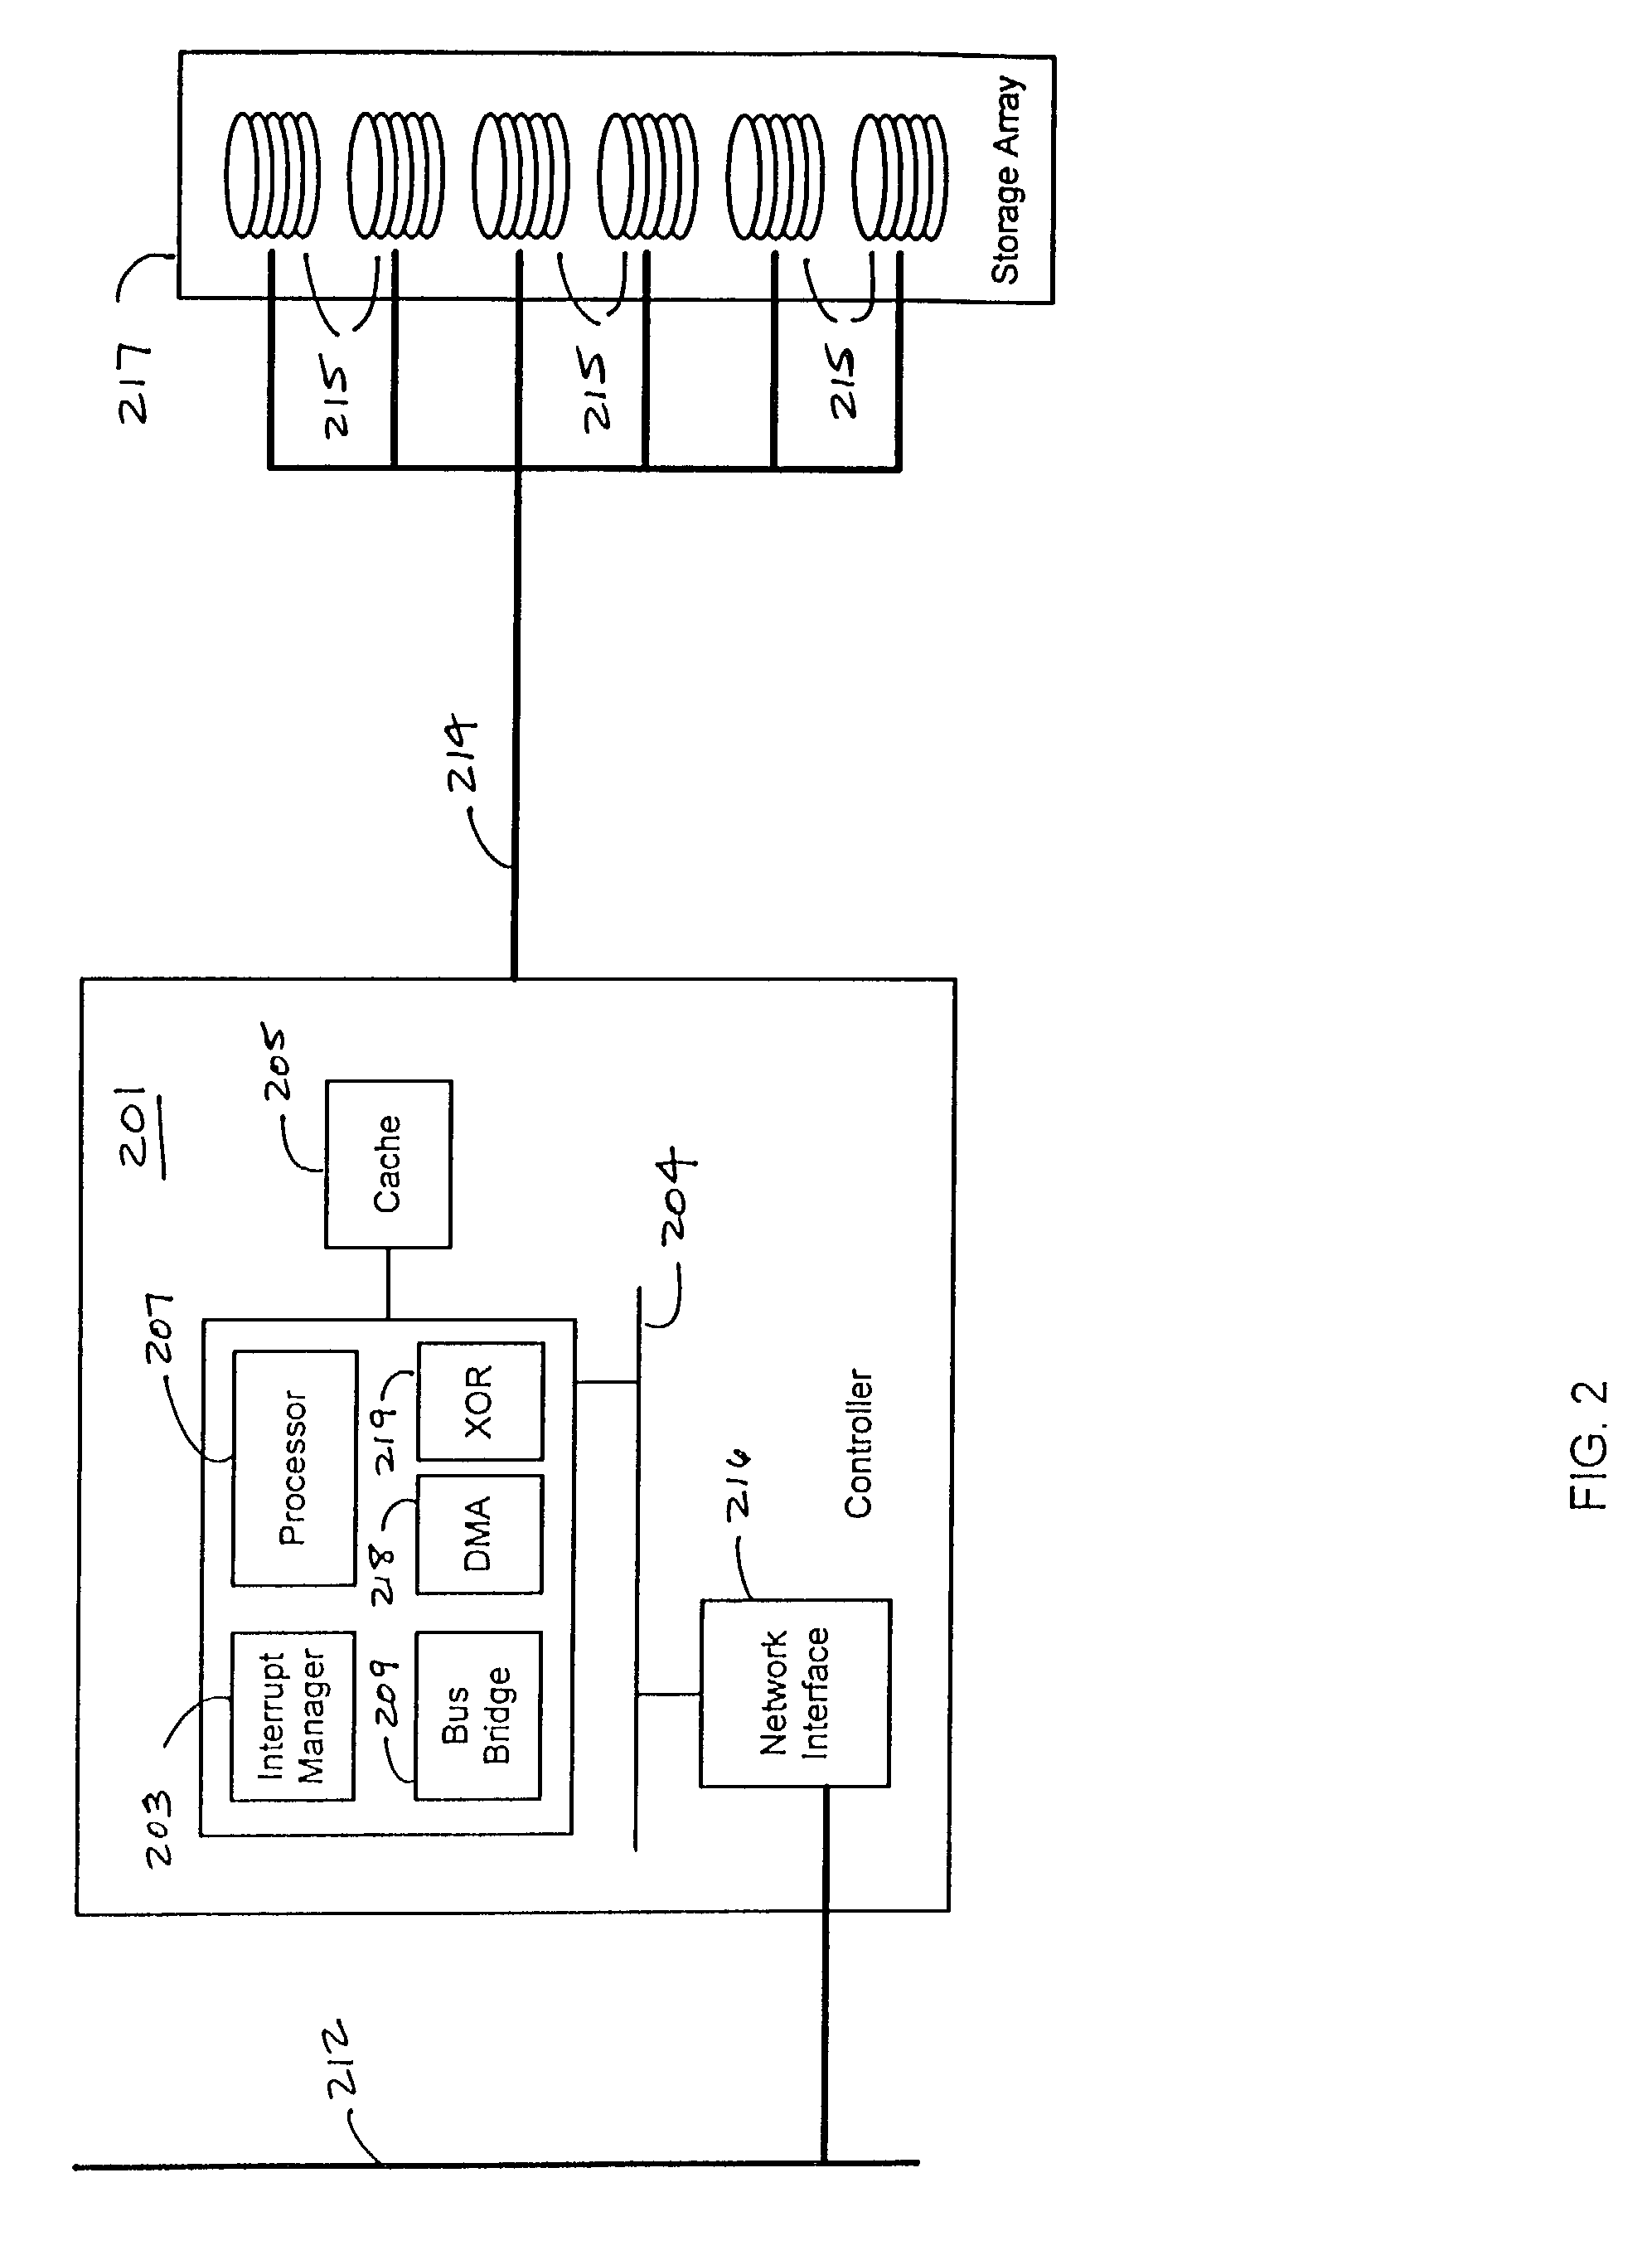 Serial interface for a data storage array